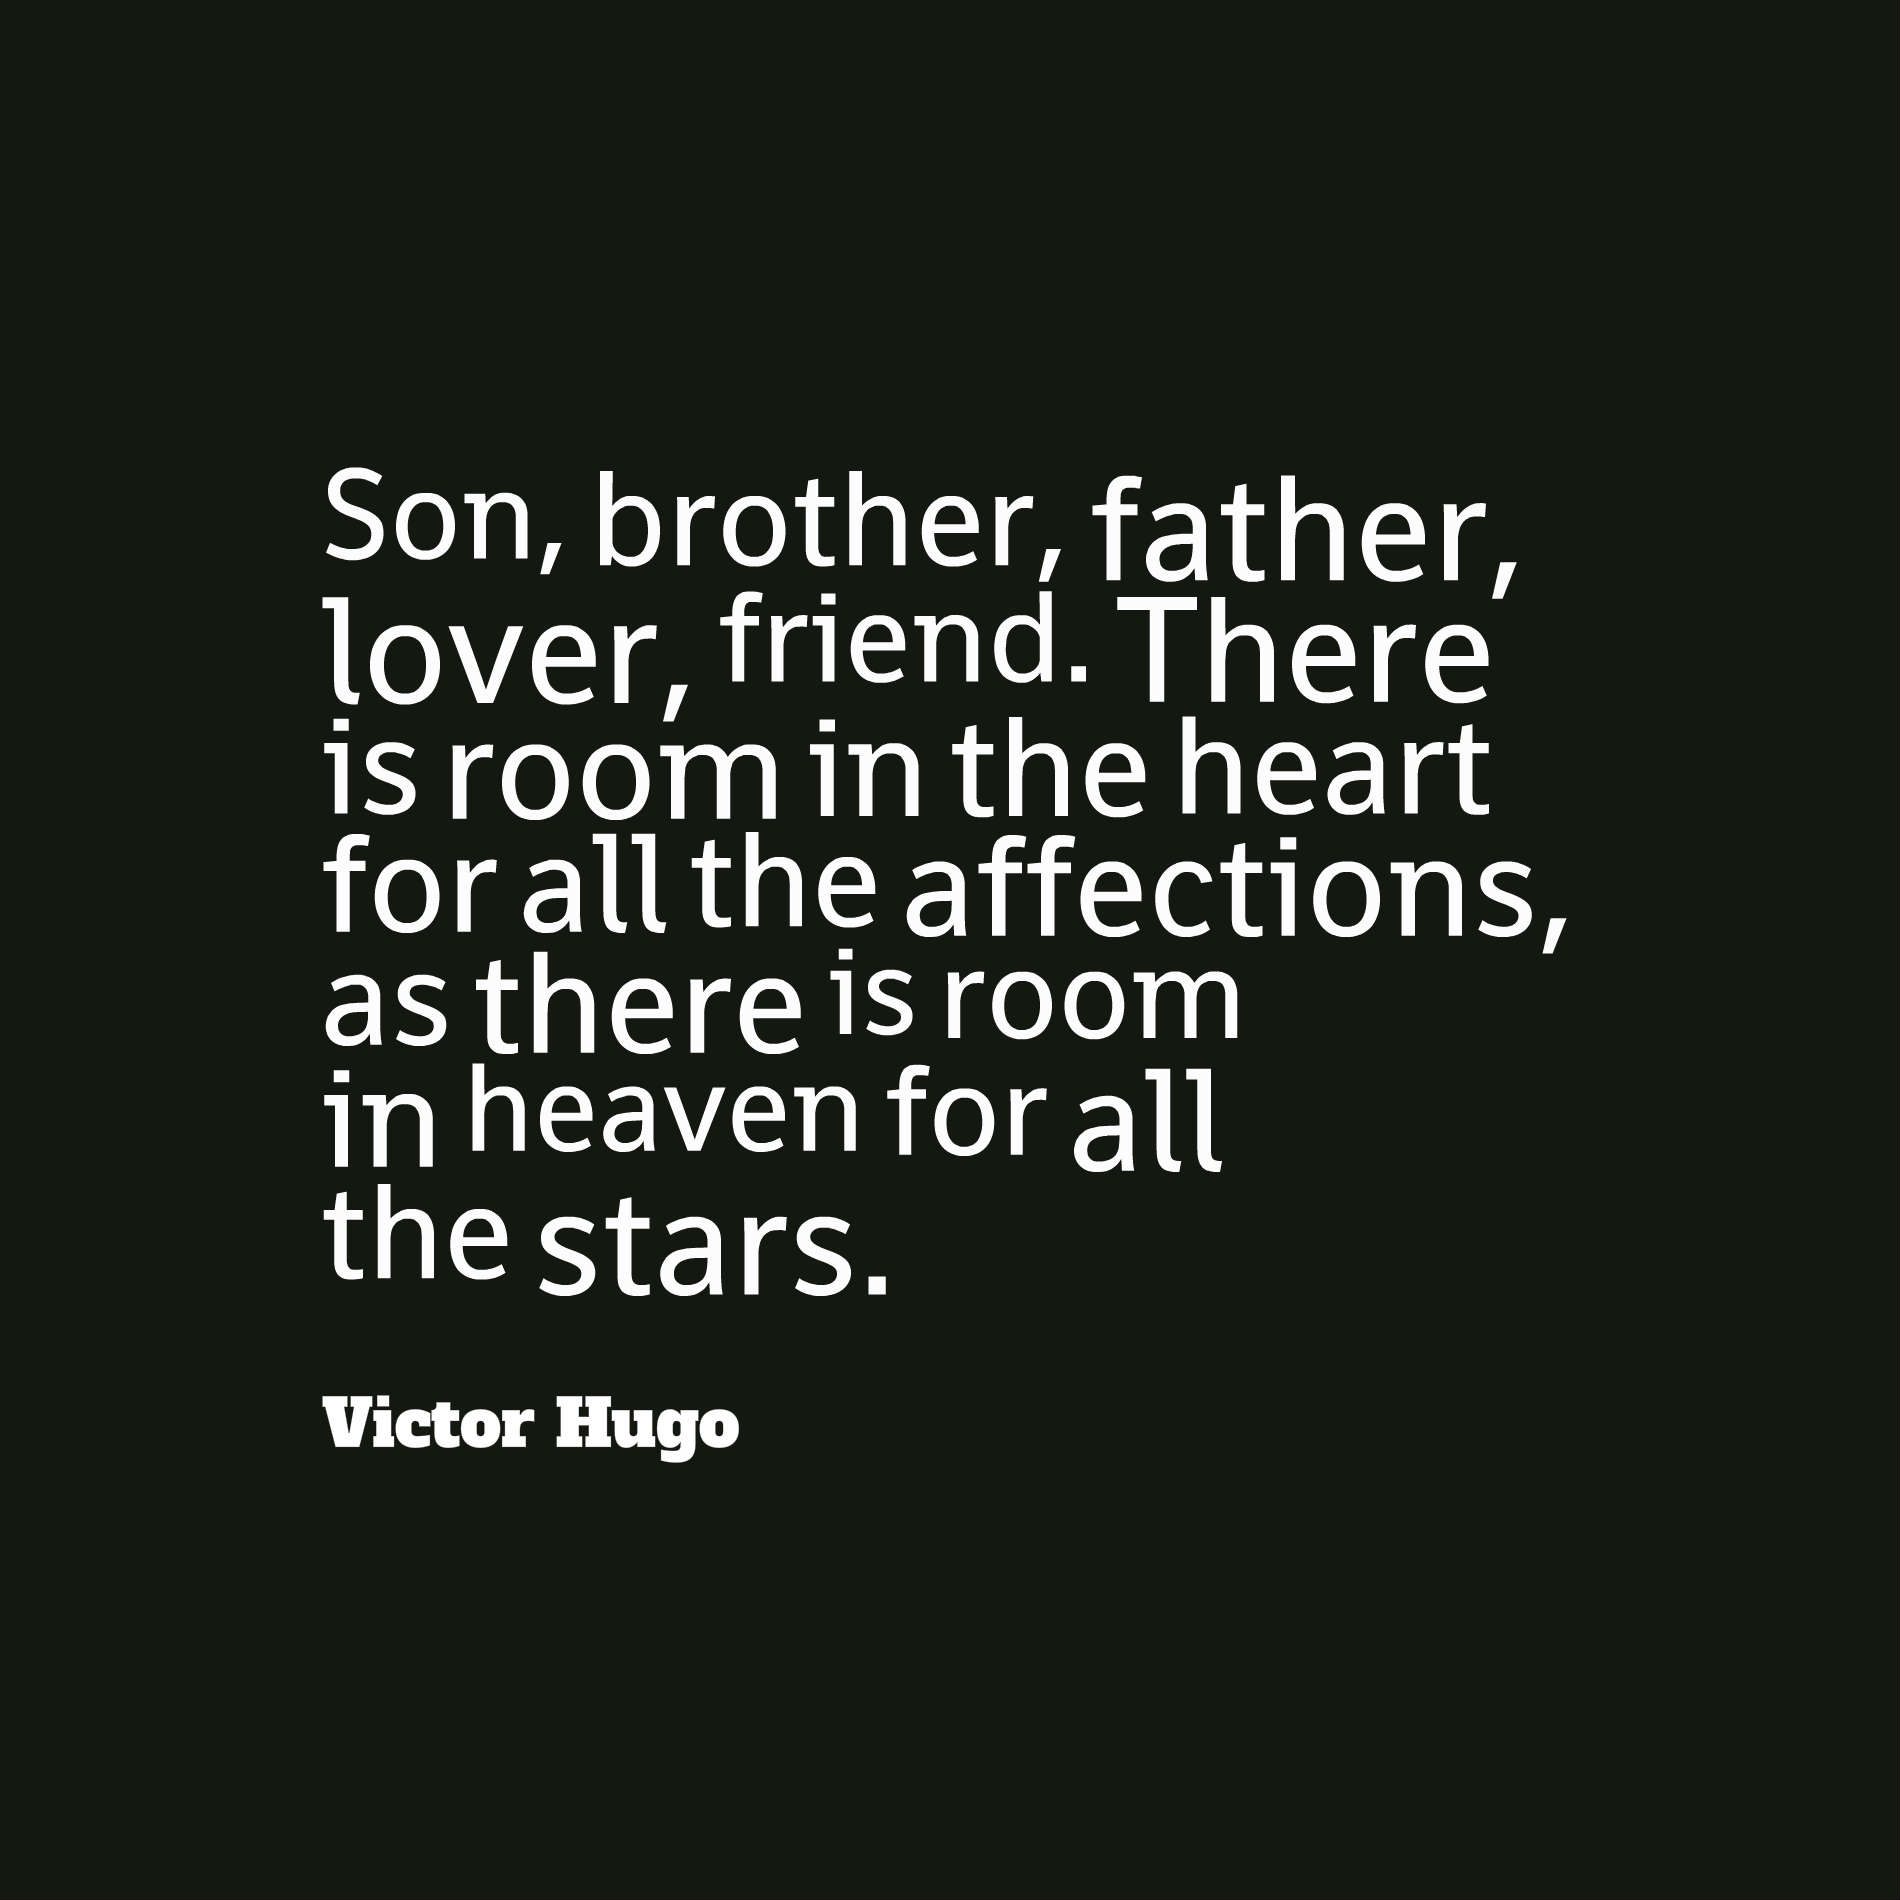 Son, brother, father, lover, friend. There is room in the heart for all the affections, as there is room in heaven for all the stars.